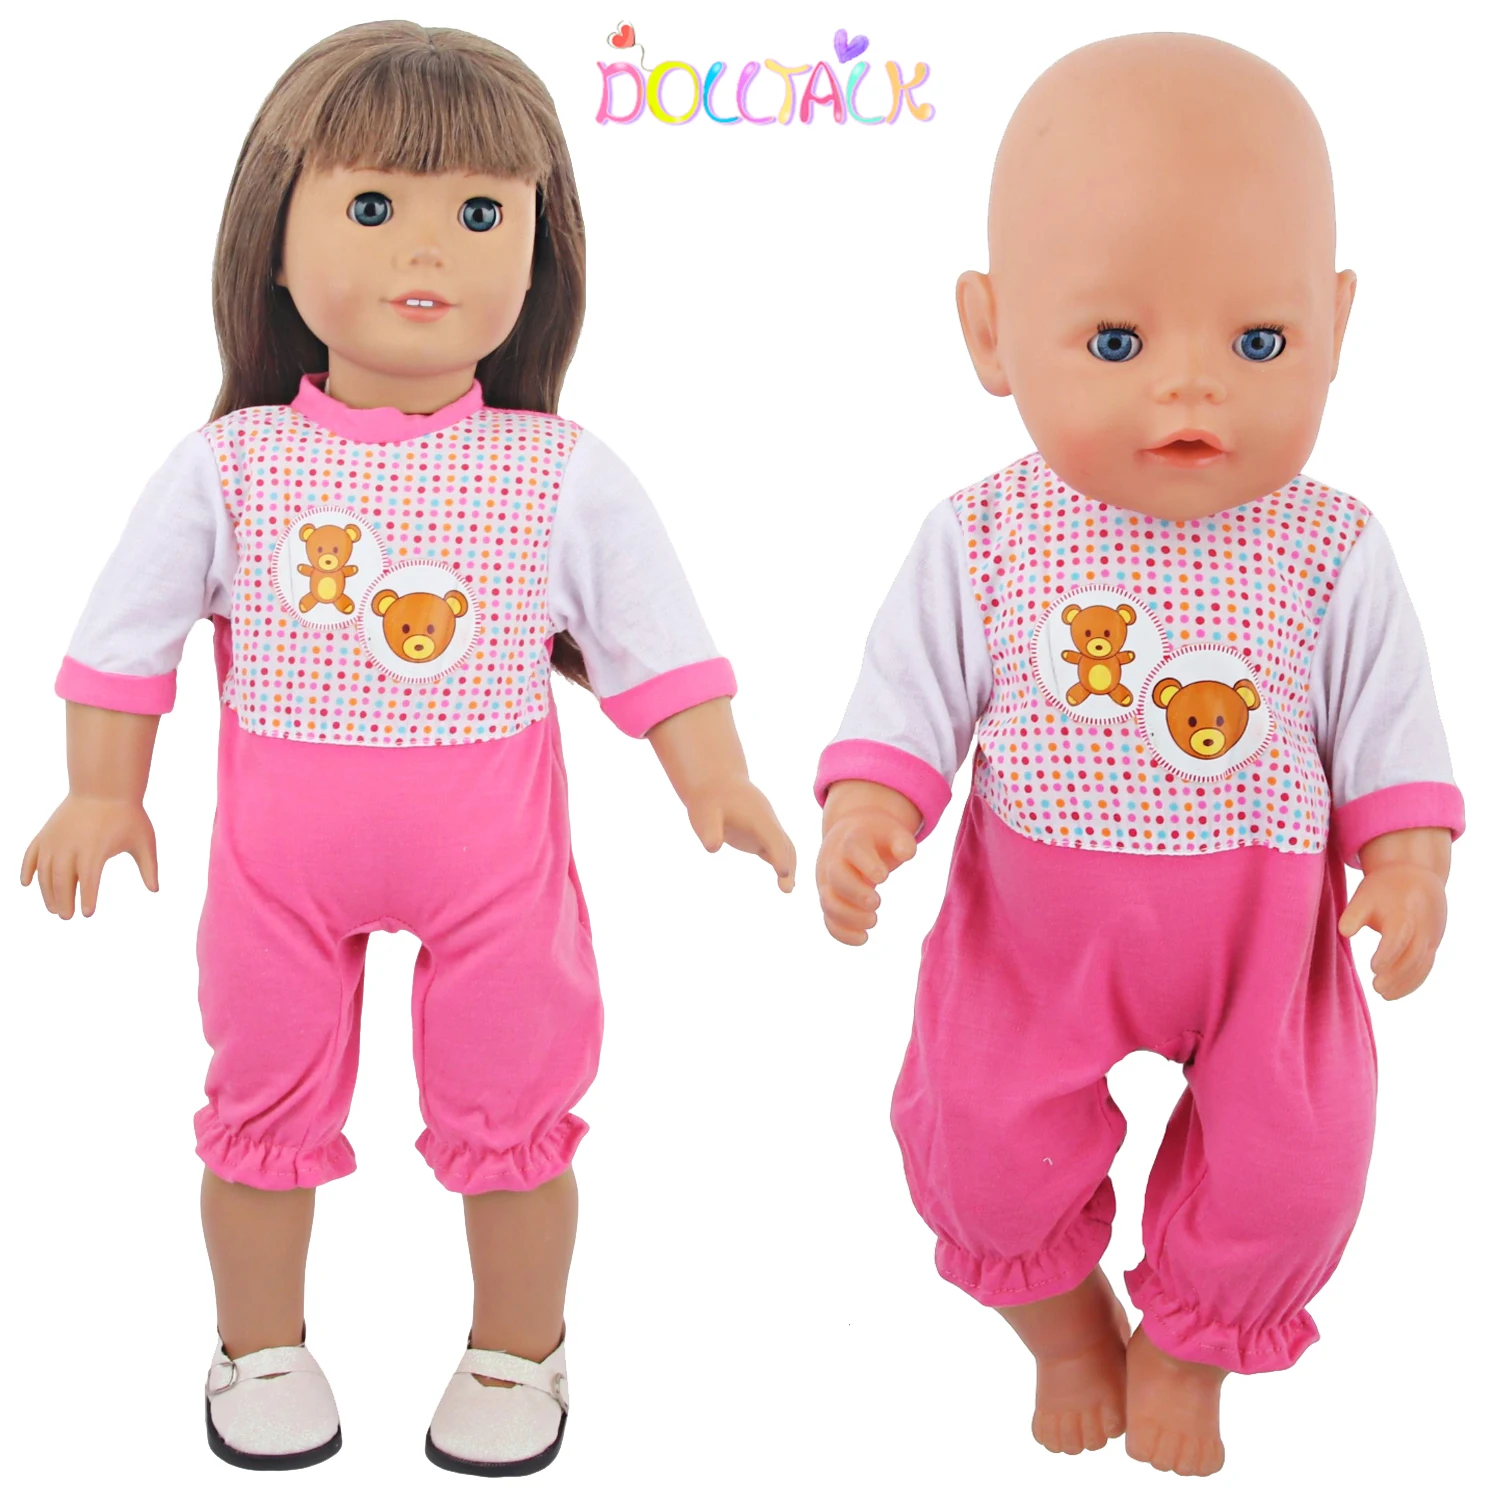 Pink Color Beer Doll Clothes Fit For American 18 Inch Girl Doll One-piece Garment Outfit 43 Cm Baby New Born Doll Suit Toy thickened winter baby stroller blanket lamb fleece knitted new born sleeping swaddling blankets solid color infant bedding stuff